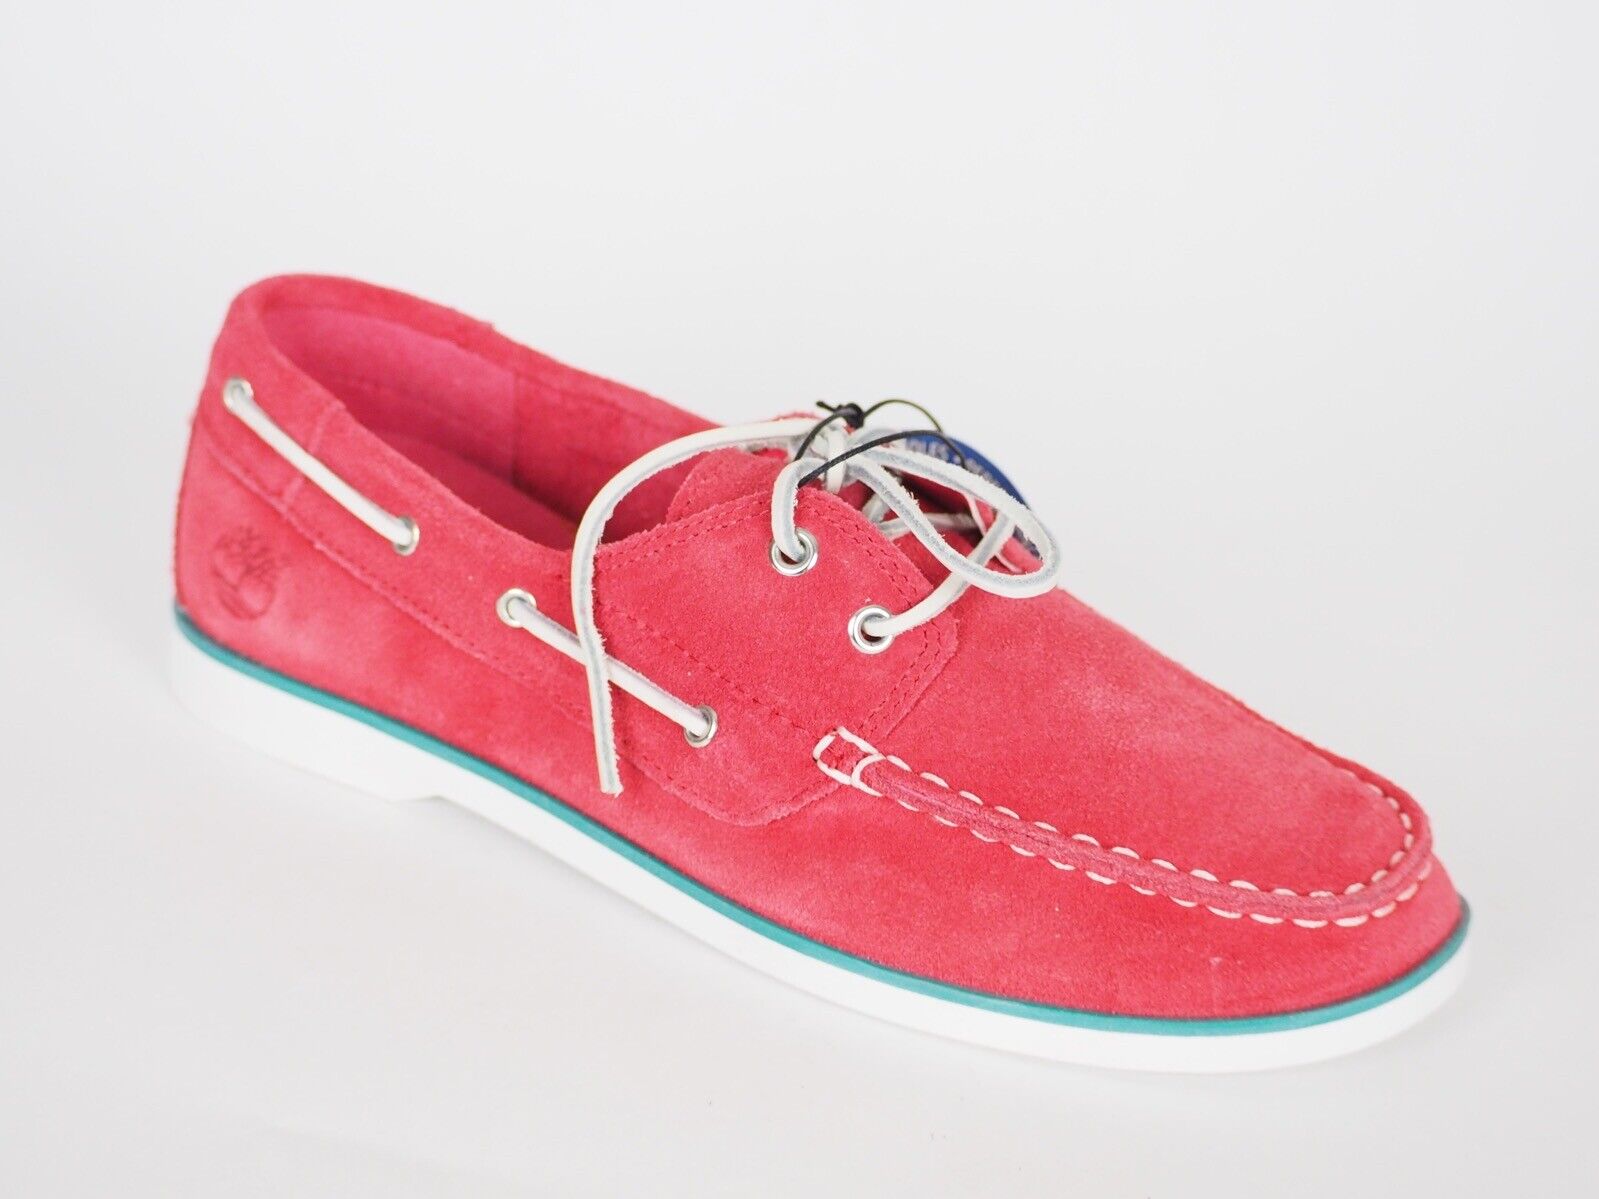 Juniors Boys Timberland Seabury Classic 2 Eye A1L67 Geranium Suede Boat Shoes - London Top Style